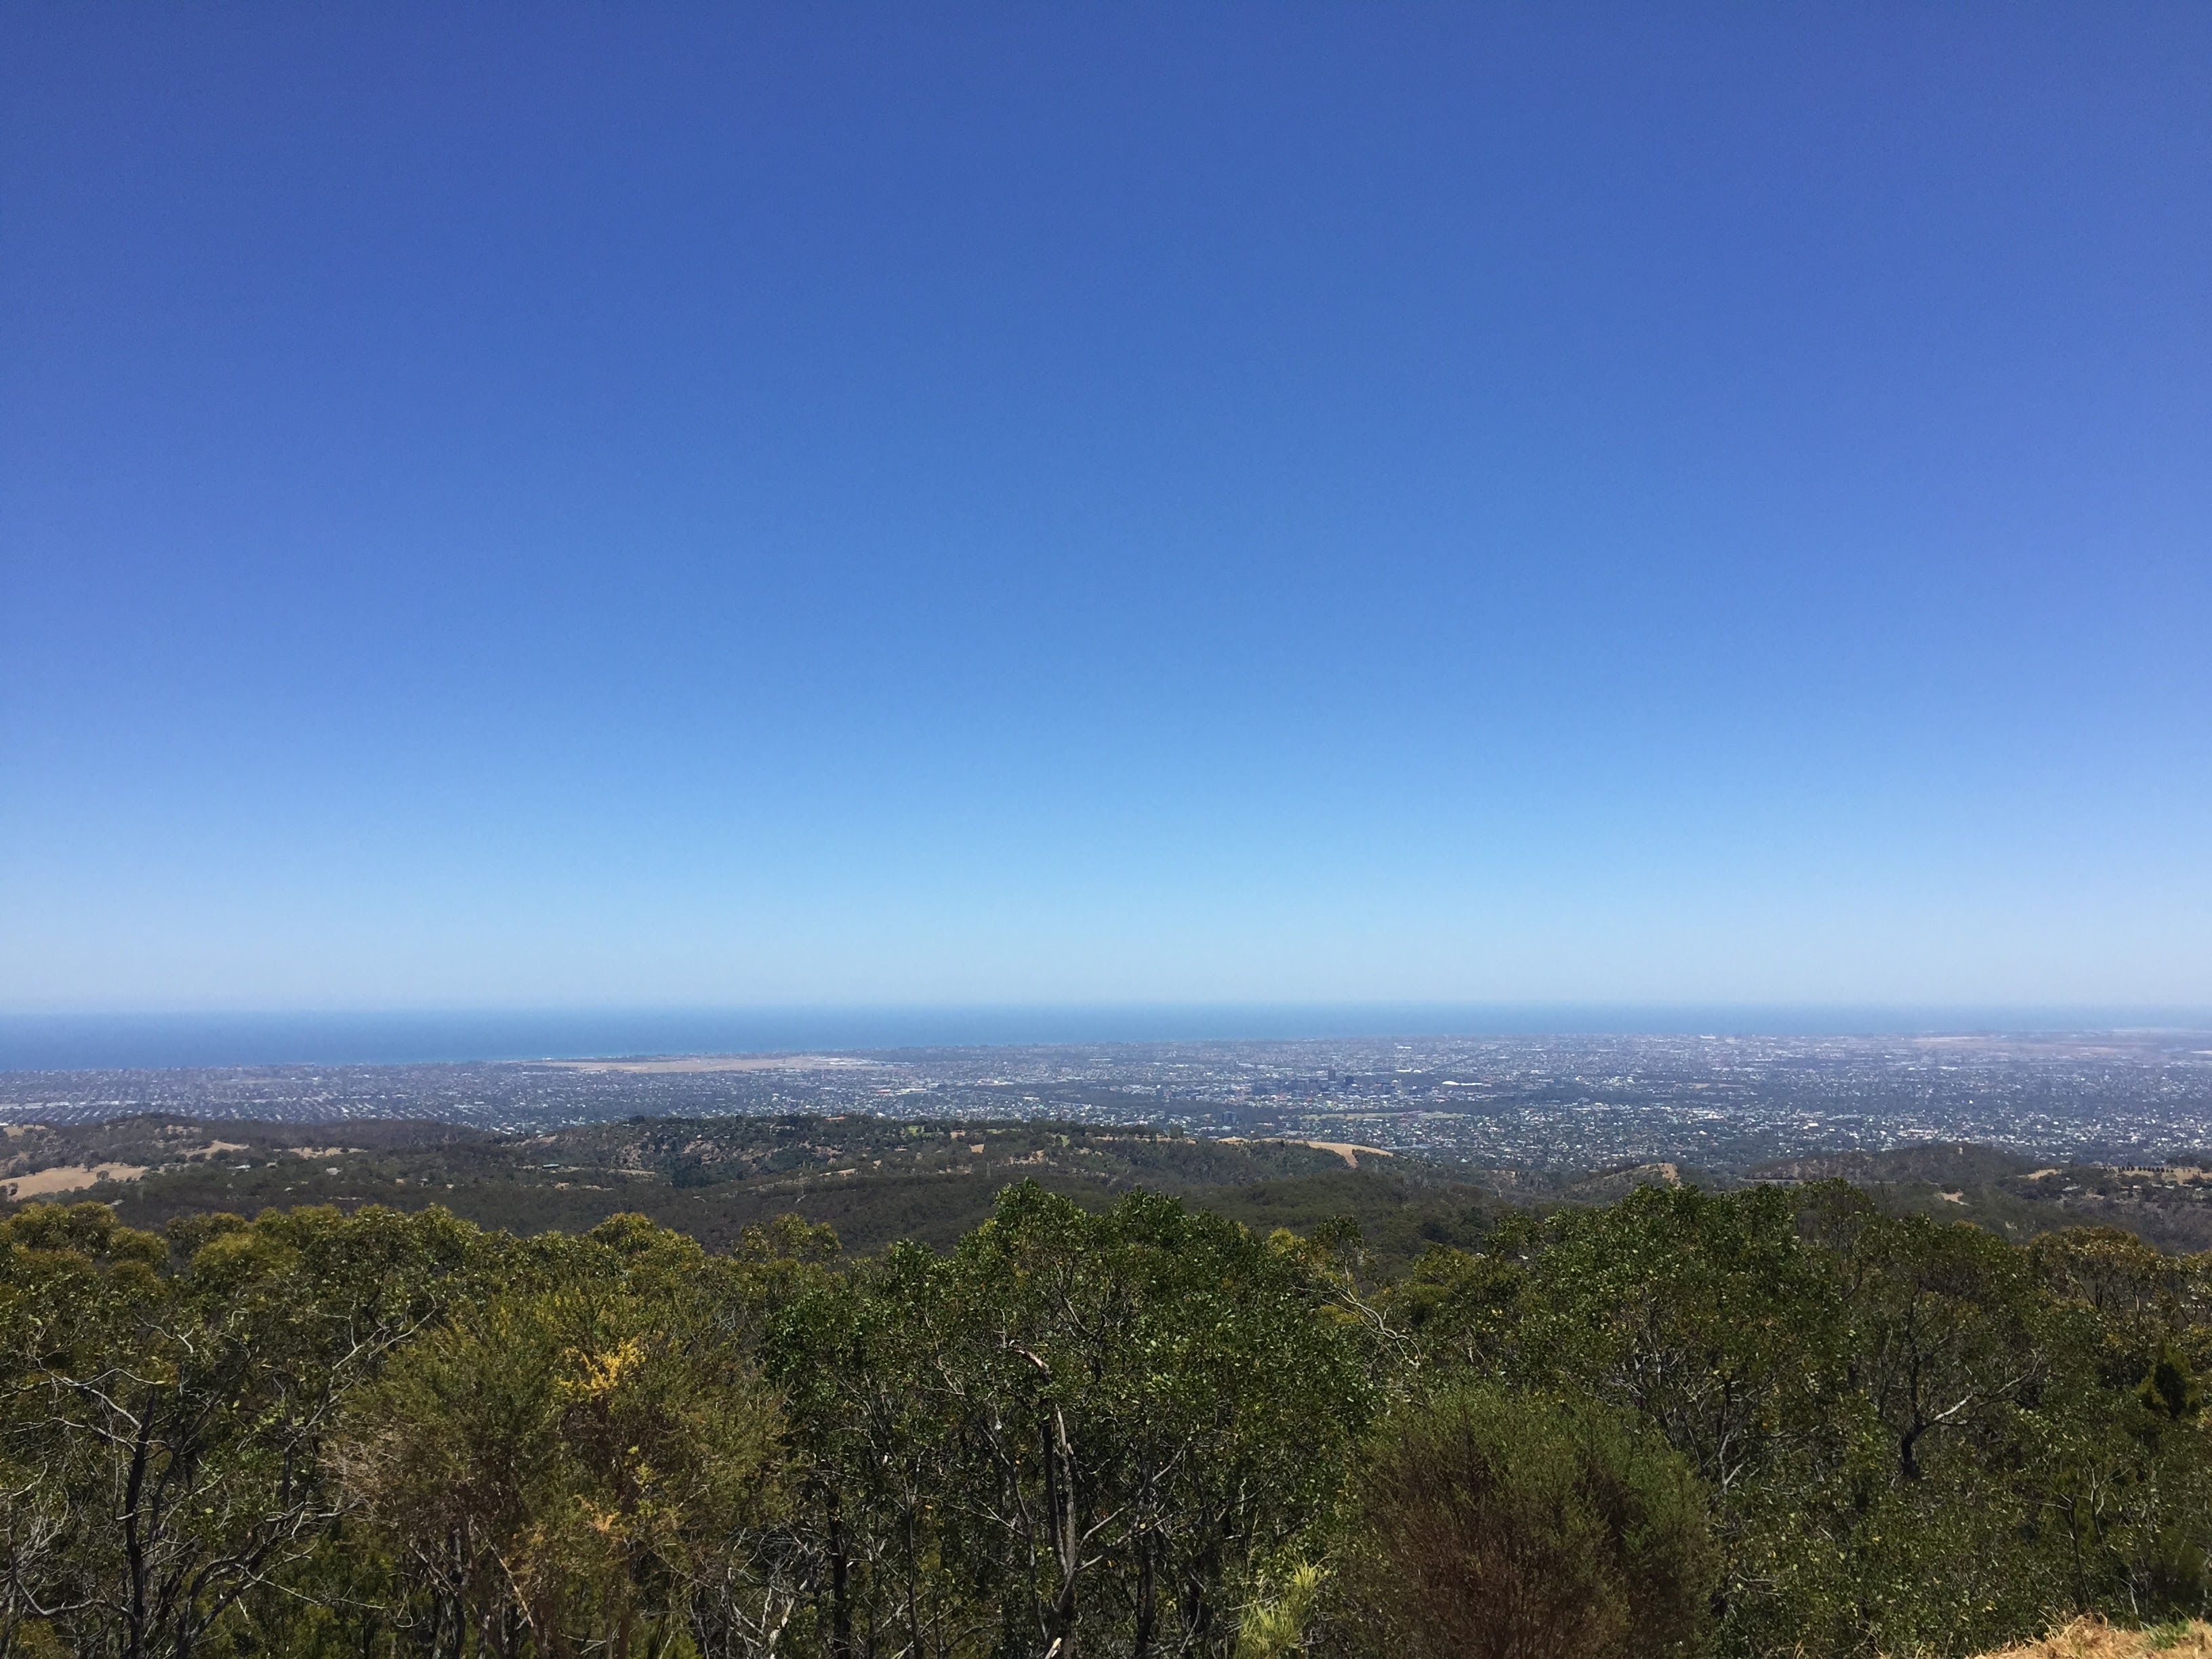 Adelaide from Mount Lofty